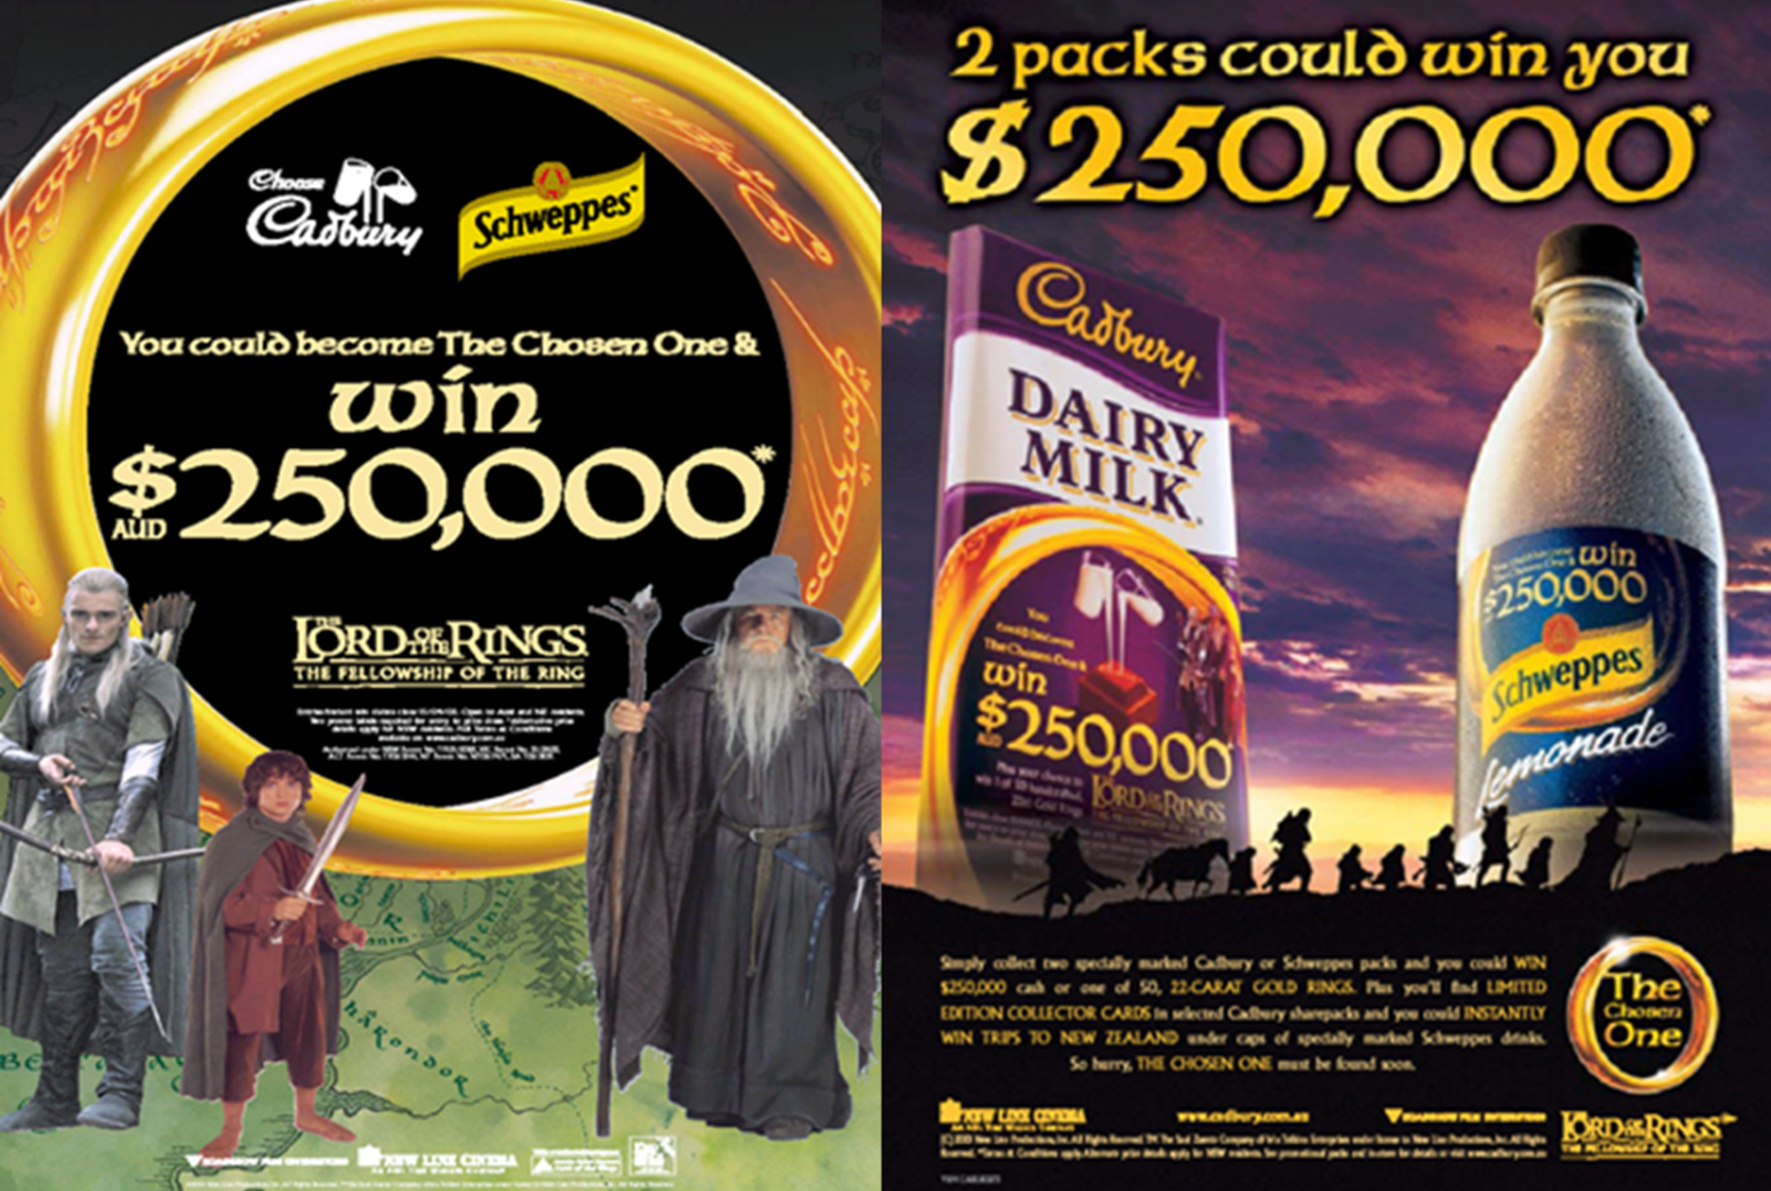 Lord Of The Rings x Cadbury Schweppes